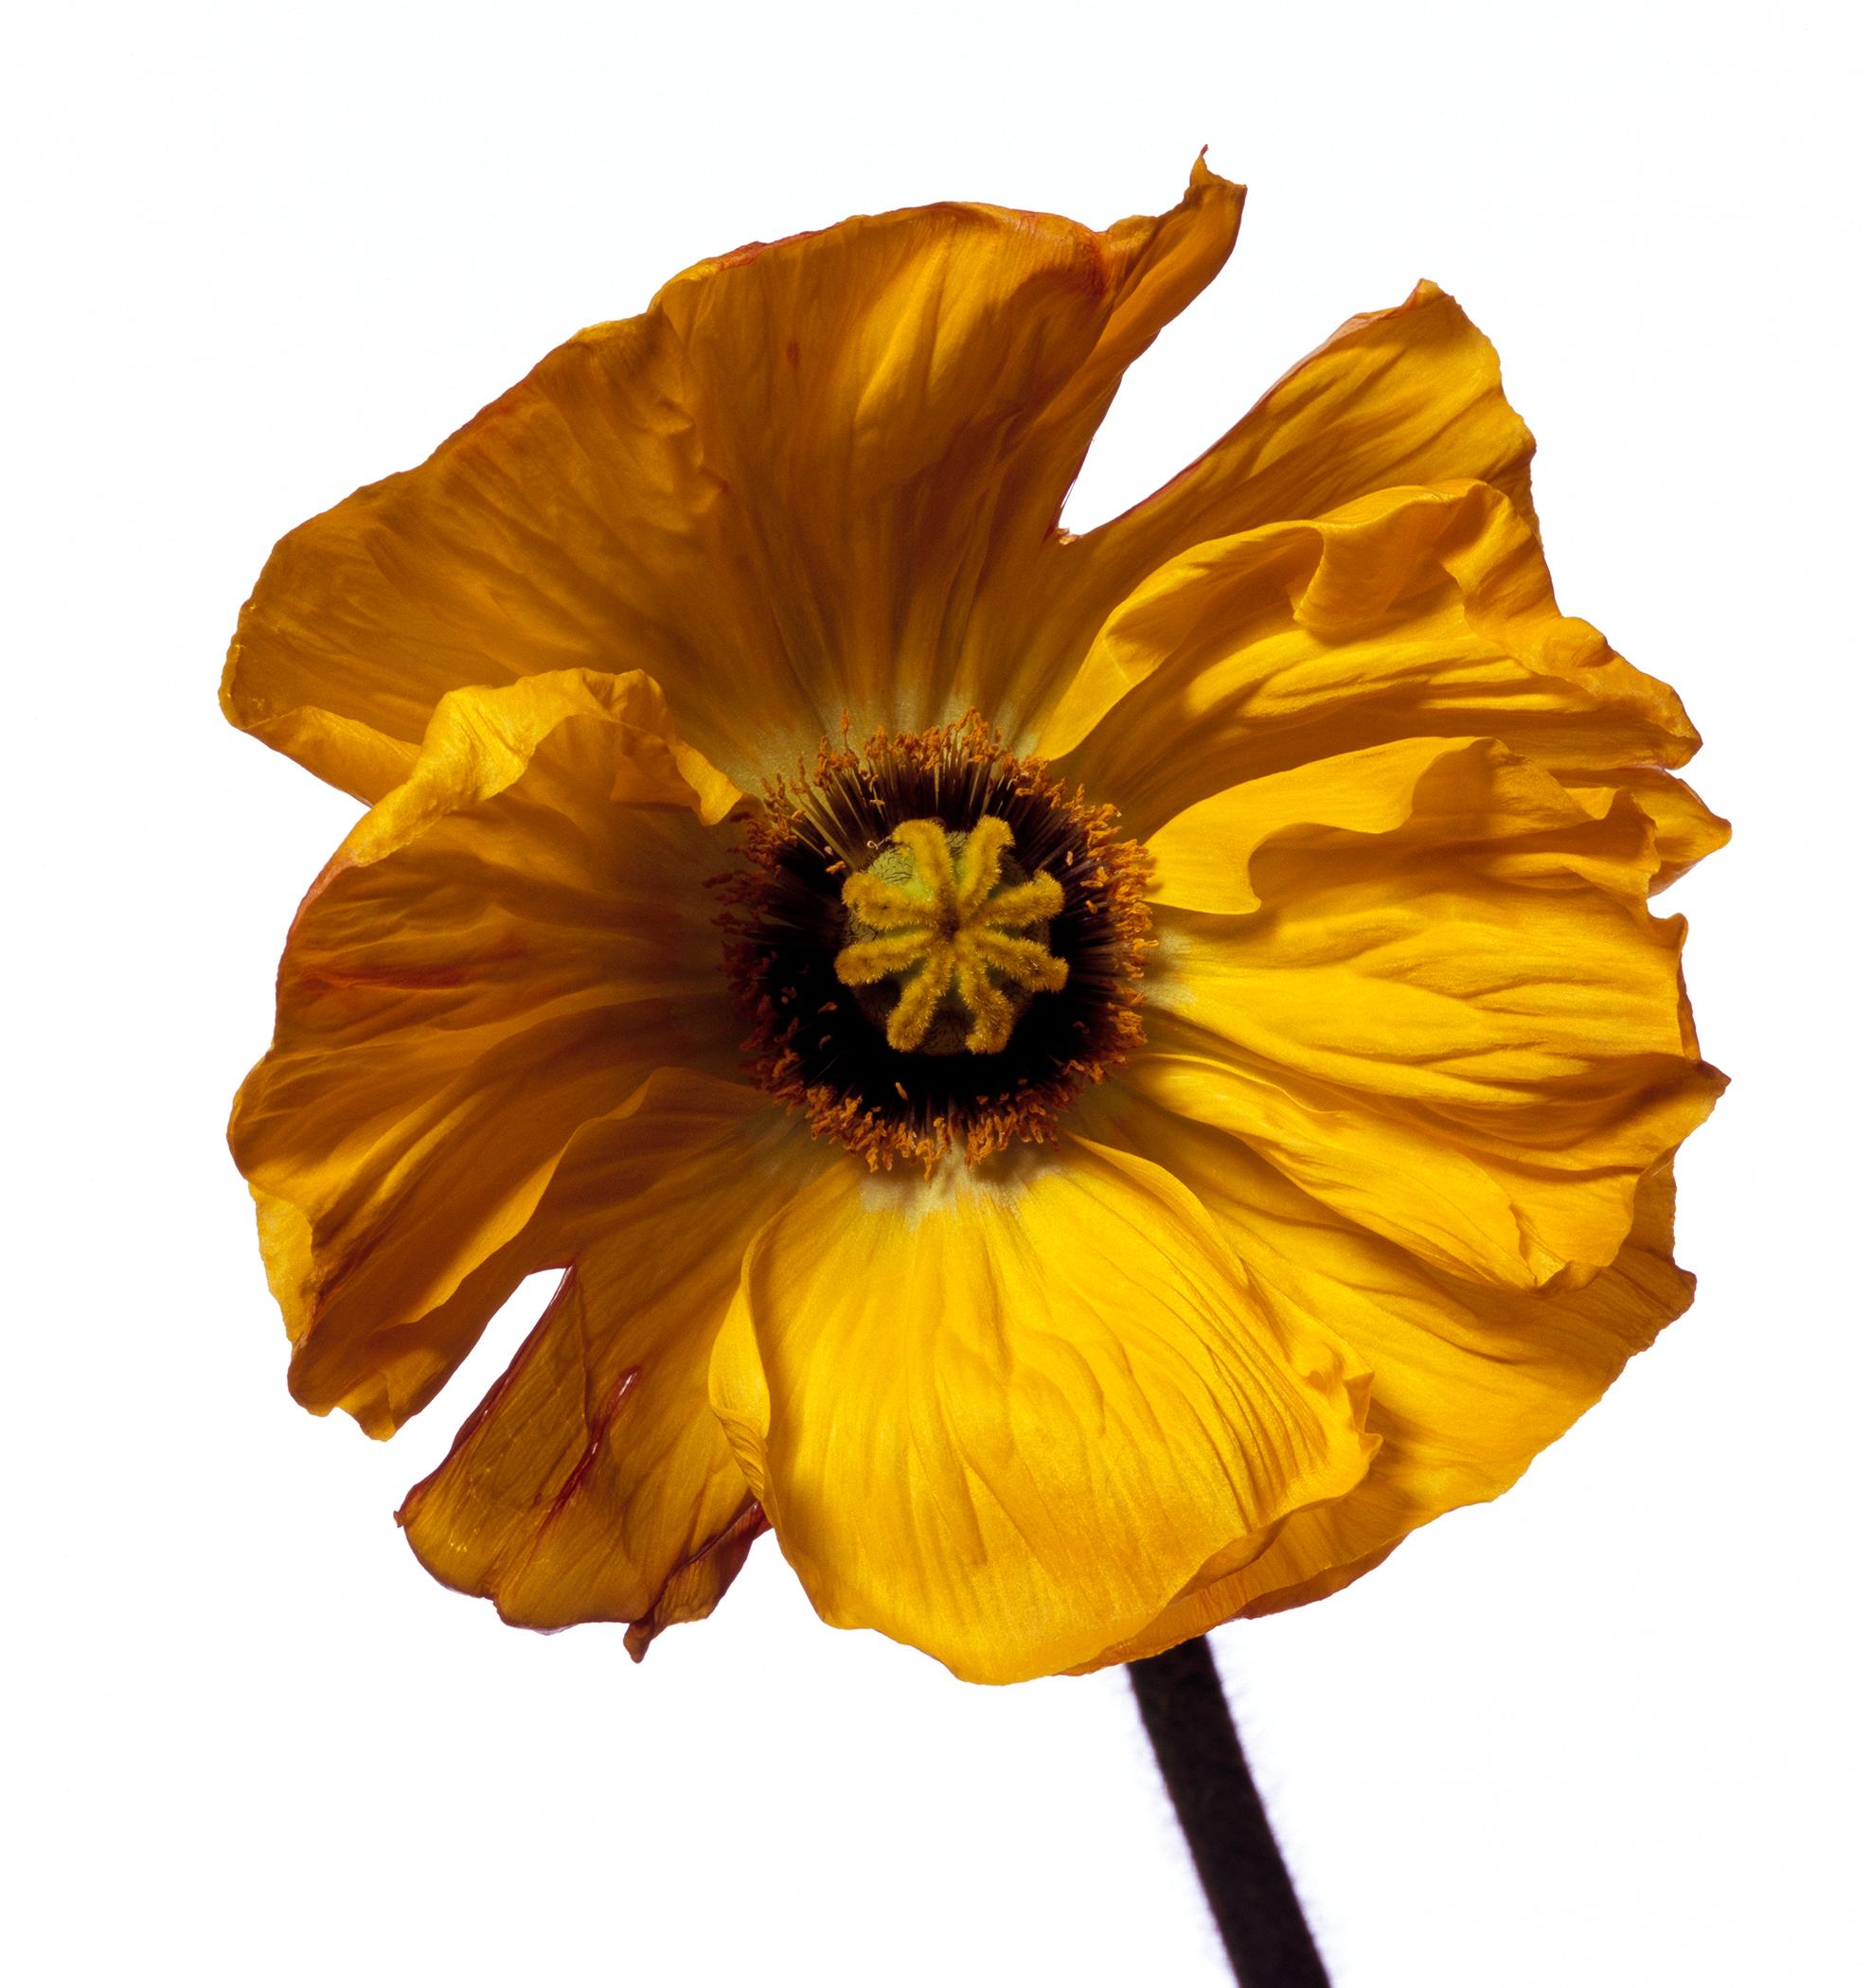 American Iceland Poppy 'Y' by Michael Zeppetello For Sale